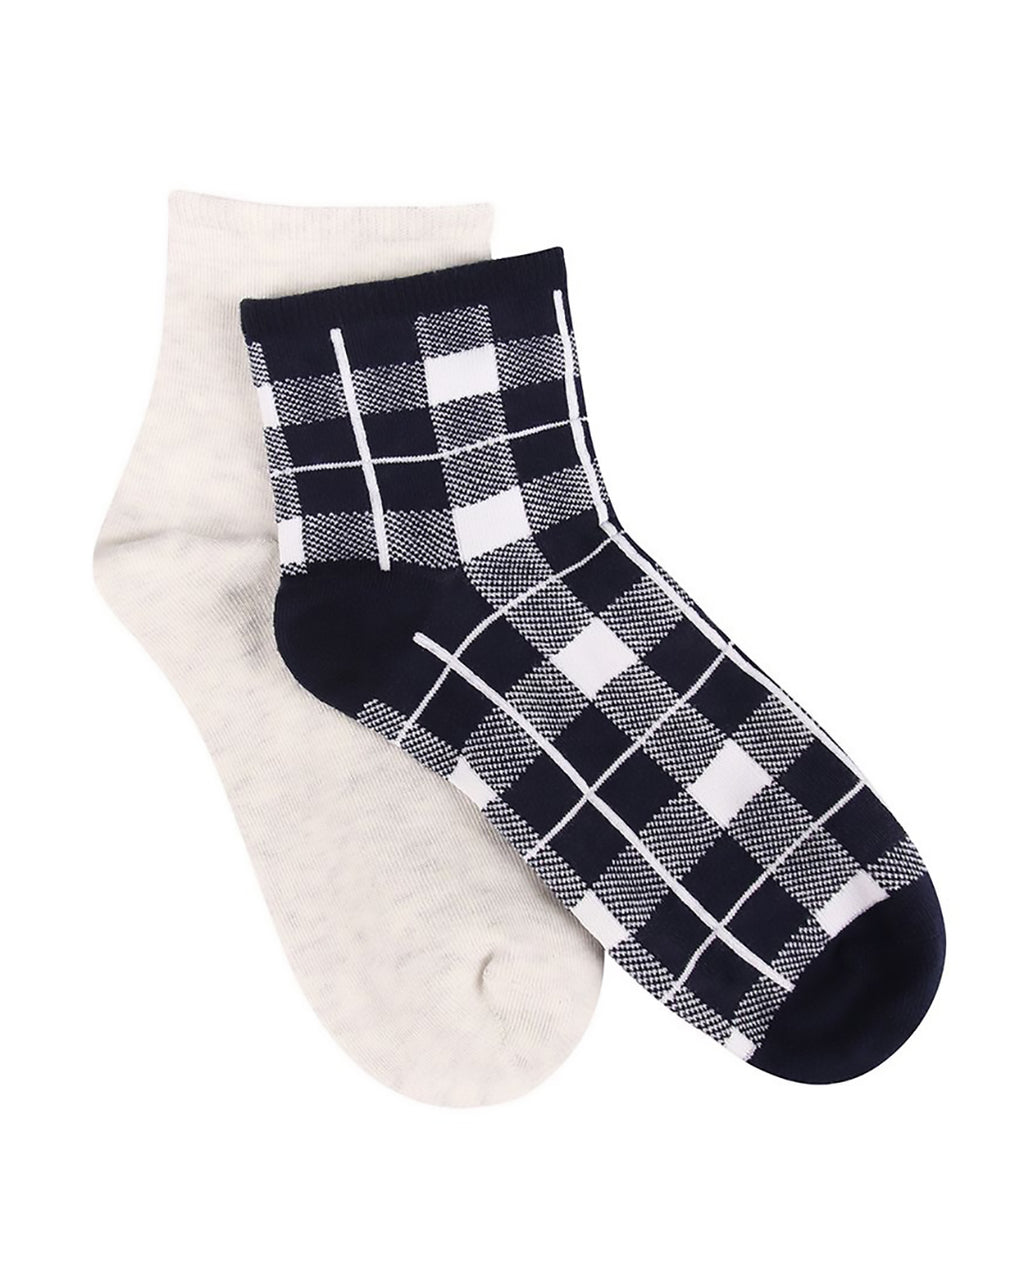 CHECKED ANKLE HIGH 2 PACK SOCKS